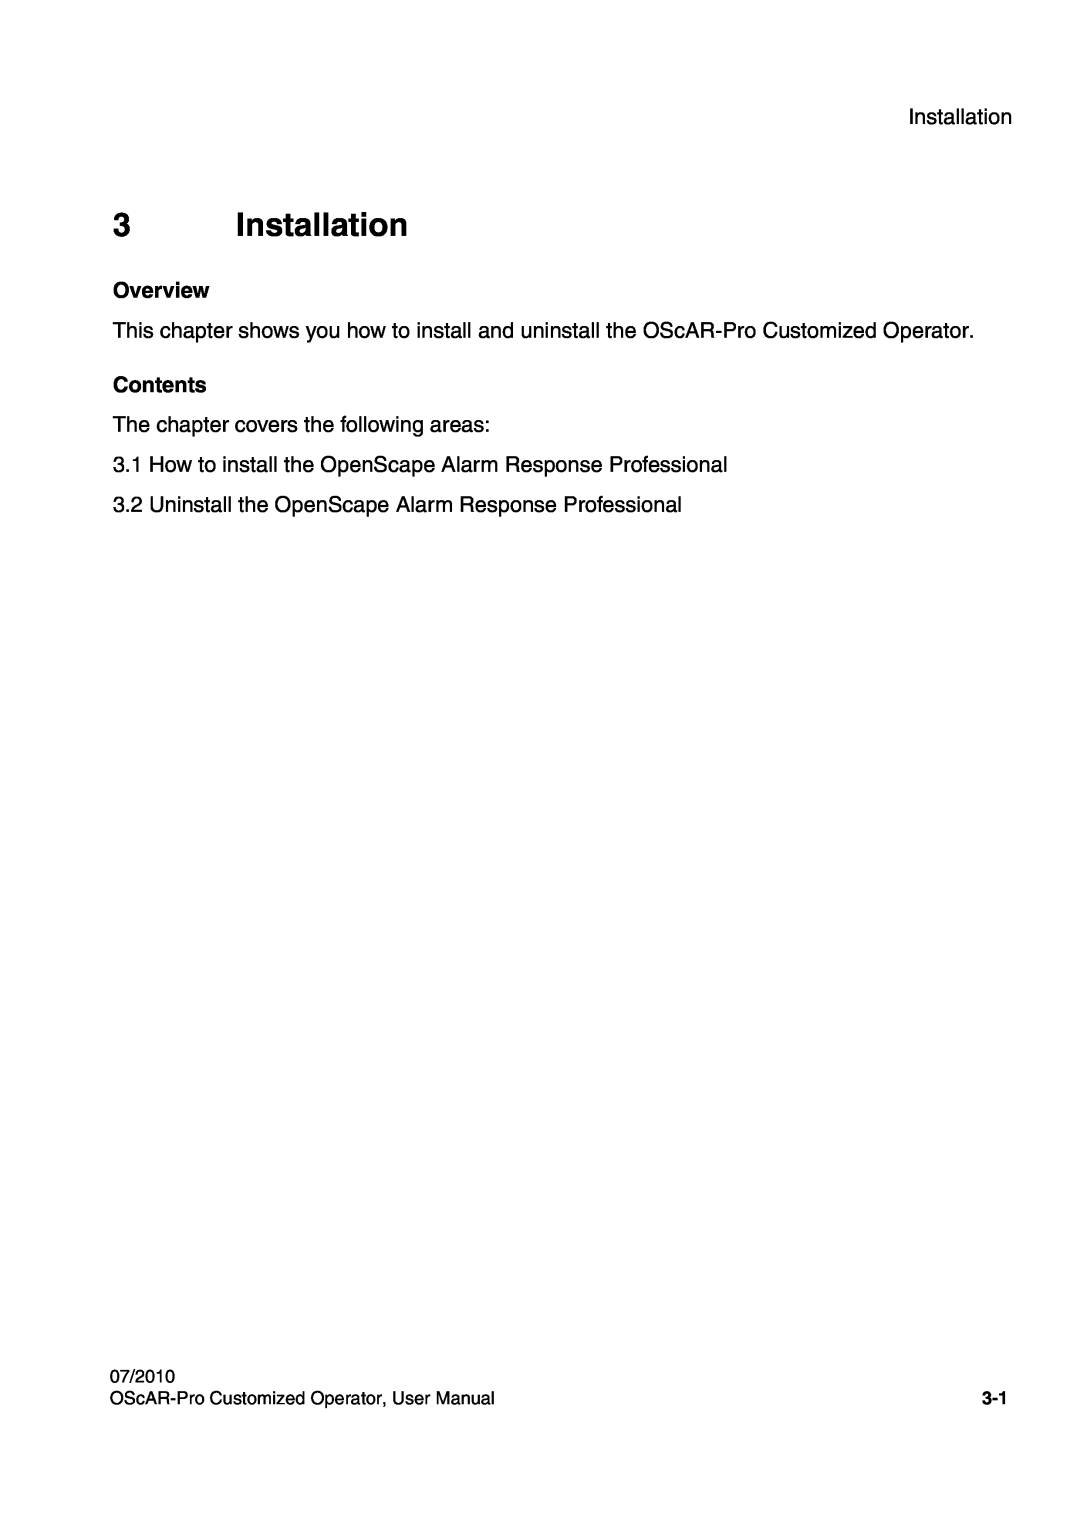 Siemens A31003-51730-U103-7619 user manual Installation, Overview, Contents 